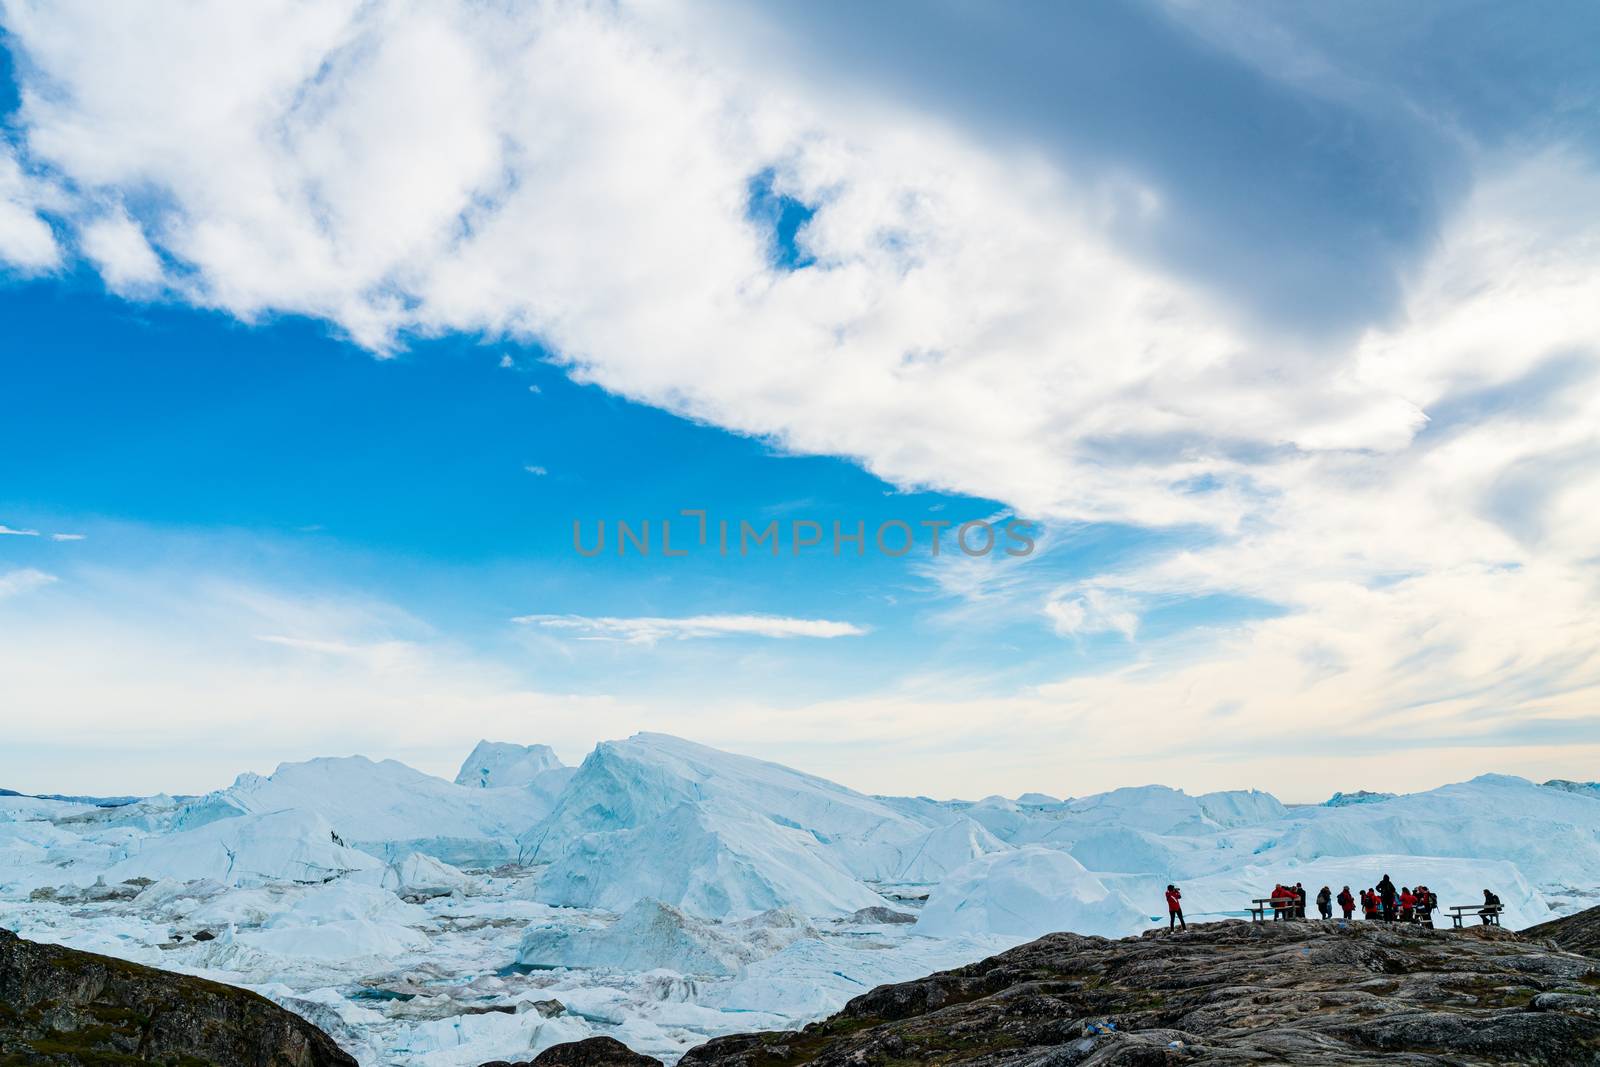 Icebergs in arctic landscape nature with travel tourists in Greenland. People looking at amazing view of Greenland Icebergs in Ilulissat icefjord affected by climate change and global warming.